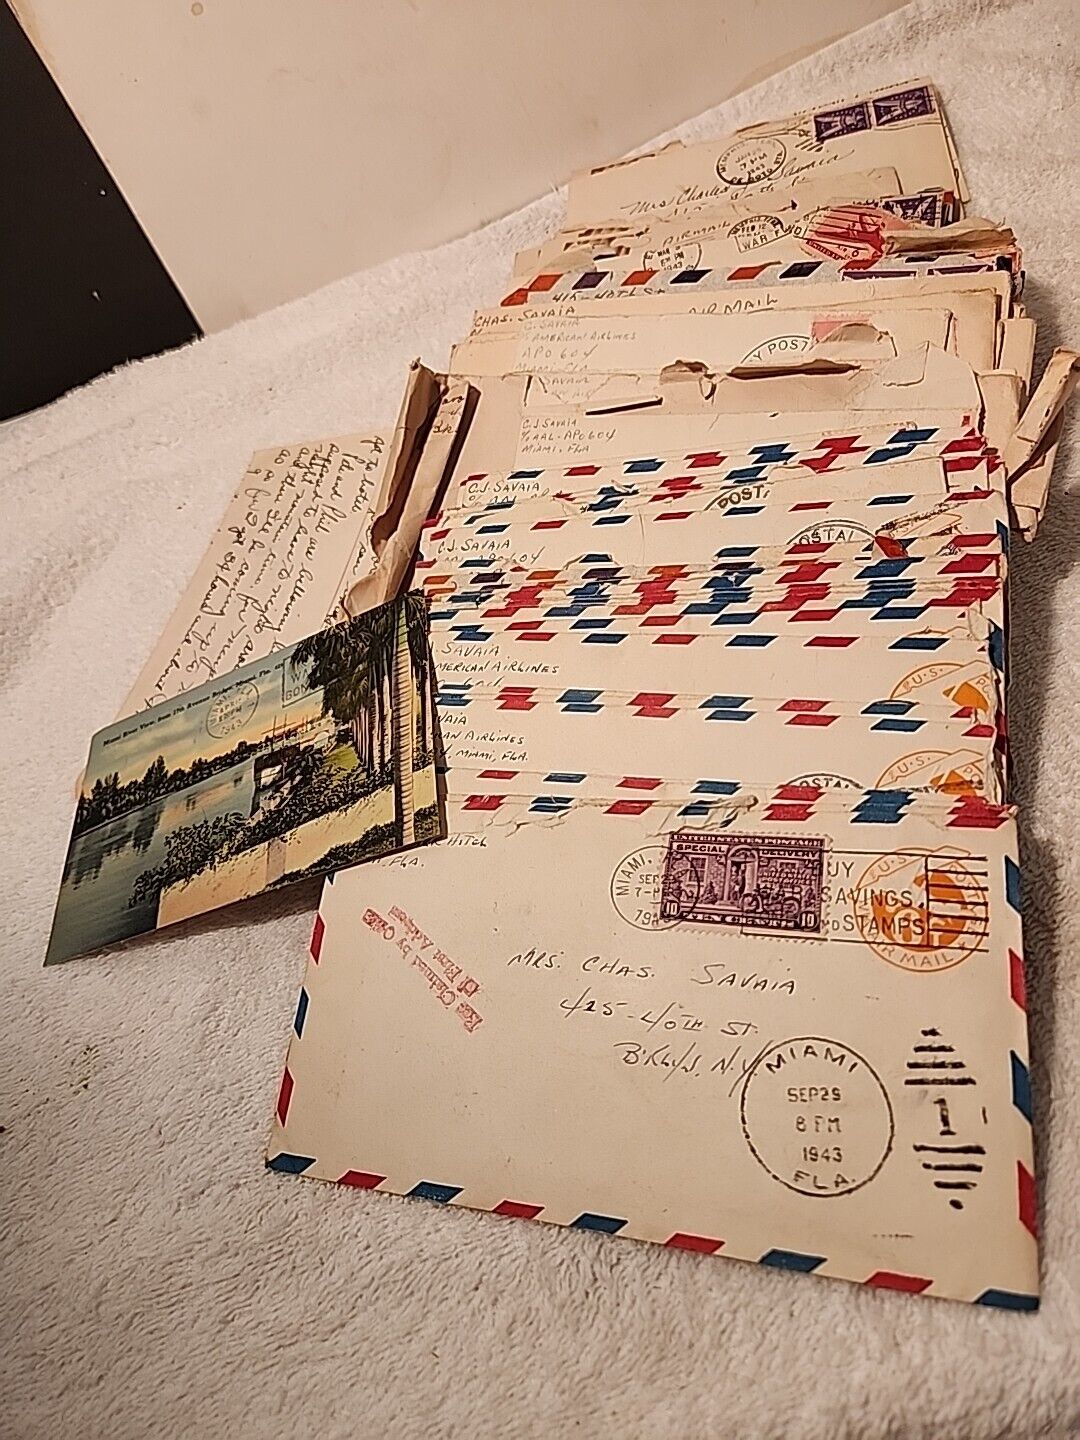 88 1943 WWII LOVE LETTERS HUSBAND MILITARY OFFICER & WIFE IN NYC JAN-SEPT